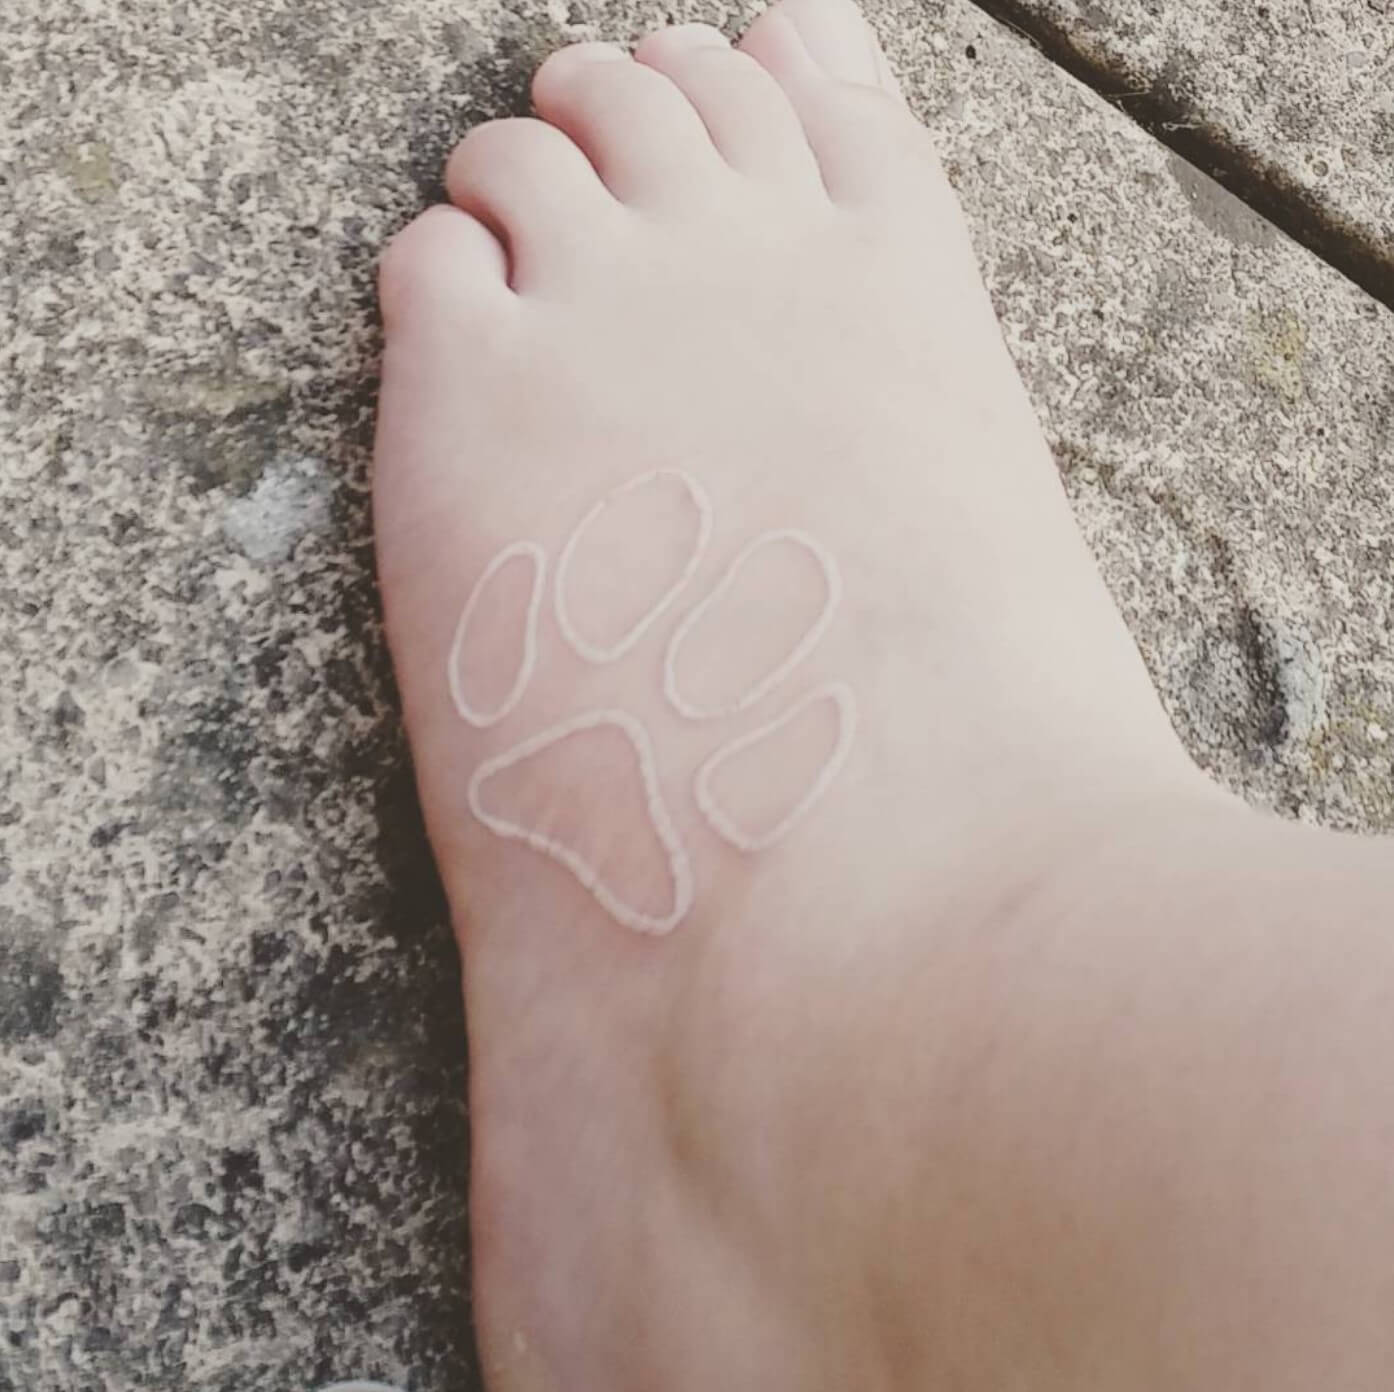 Dog footprint tattoo with white ink